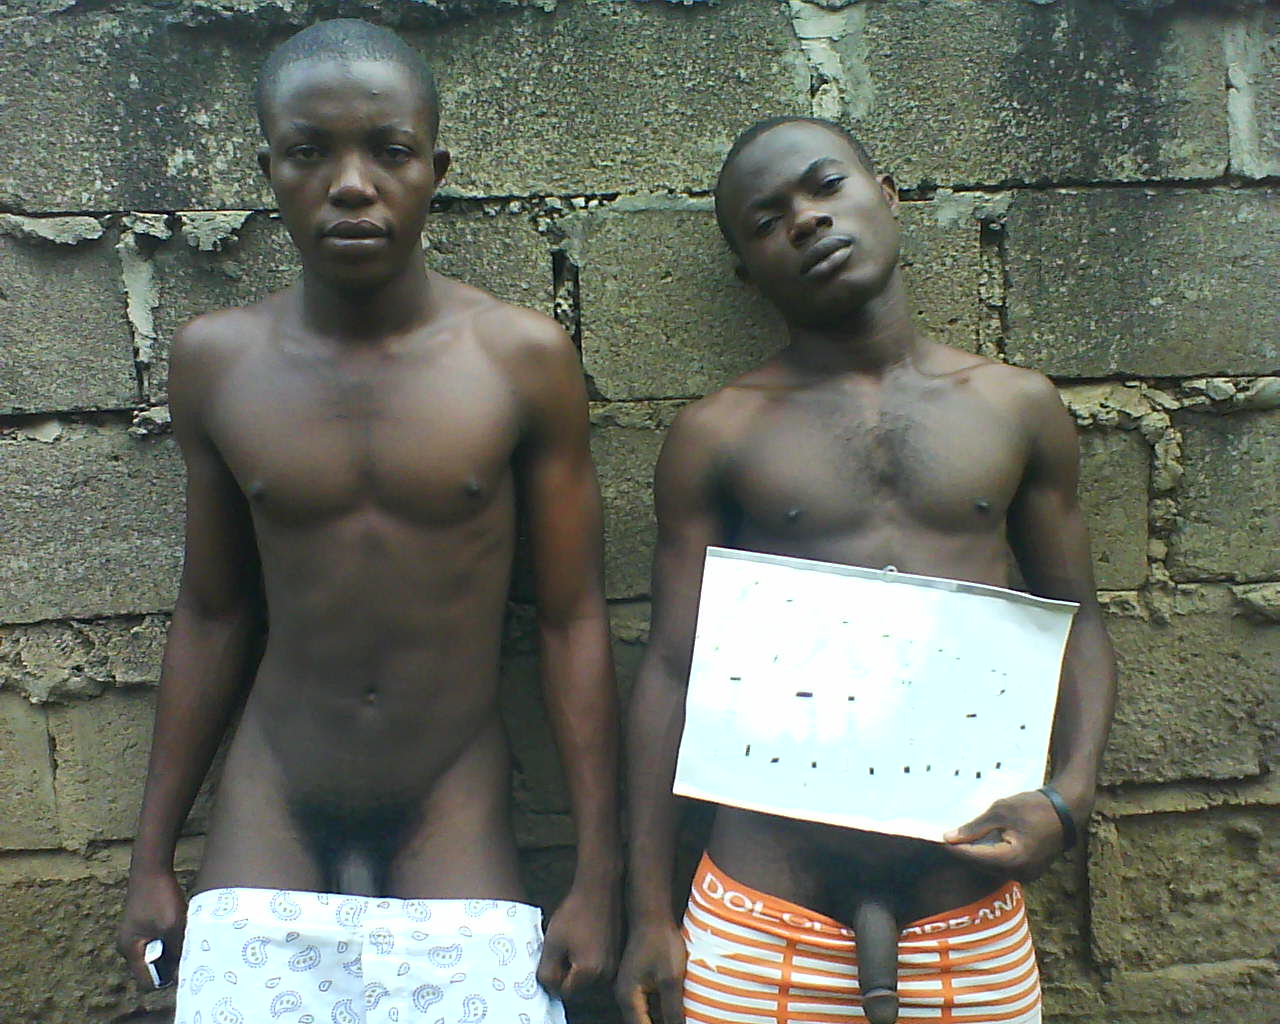 African continent gay nudes